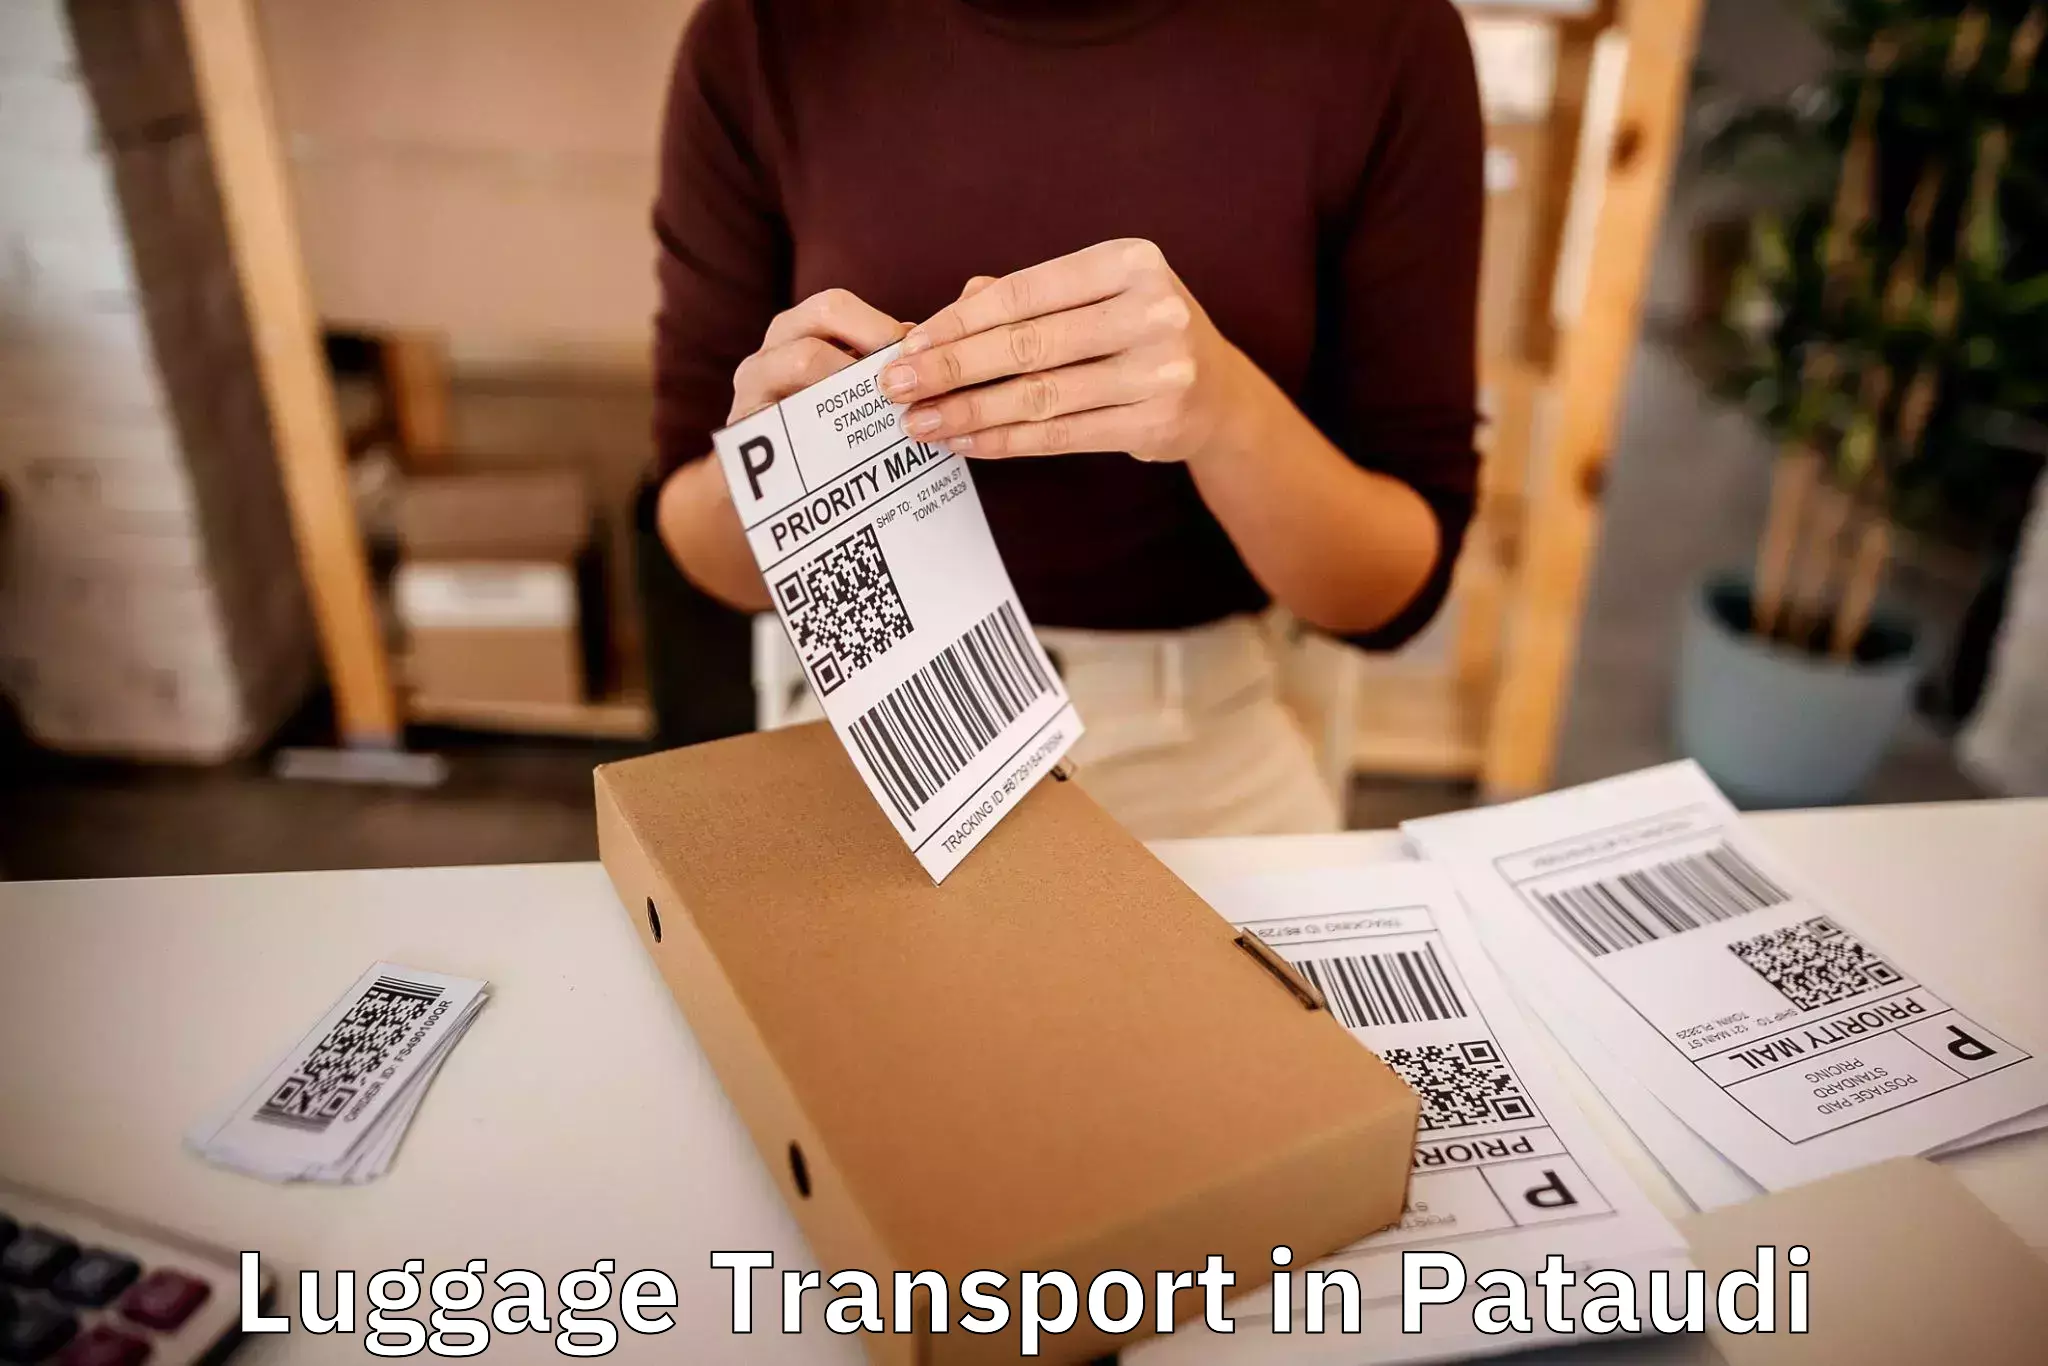 Luggage shipment specialists in Pataudi